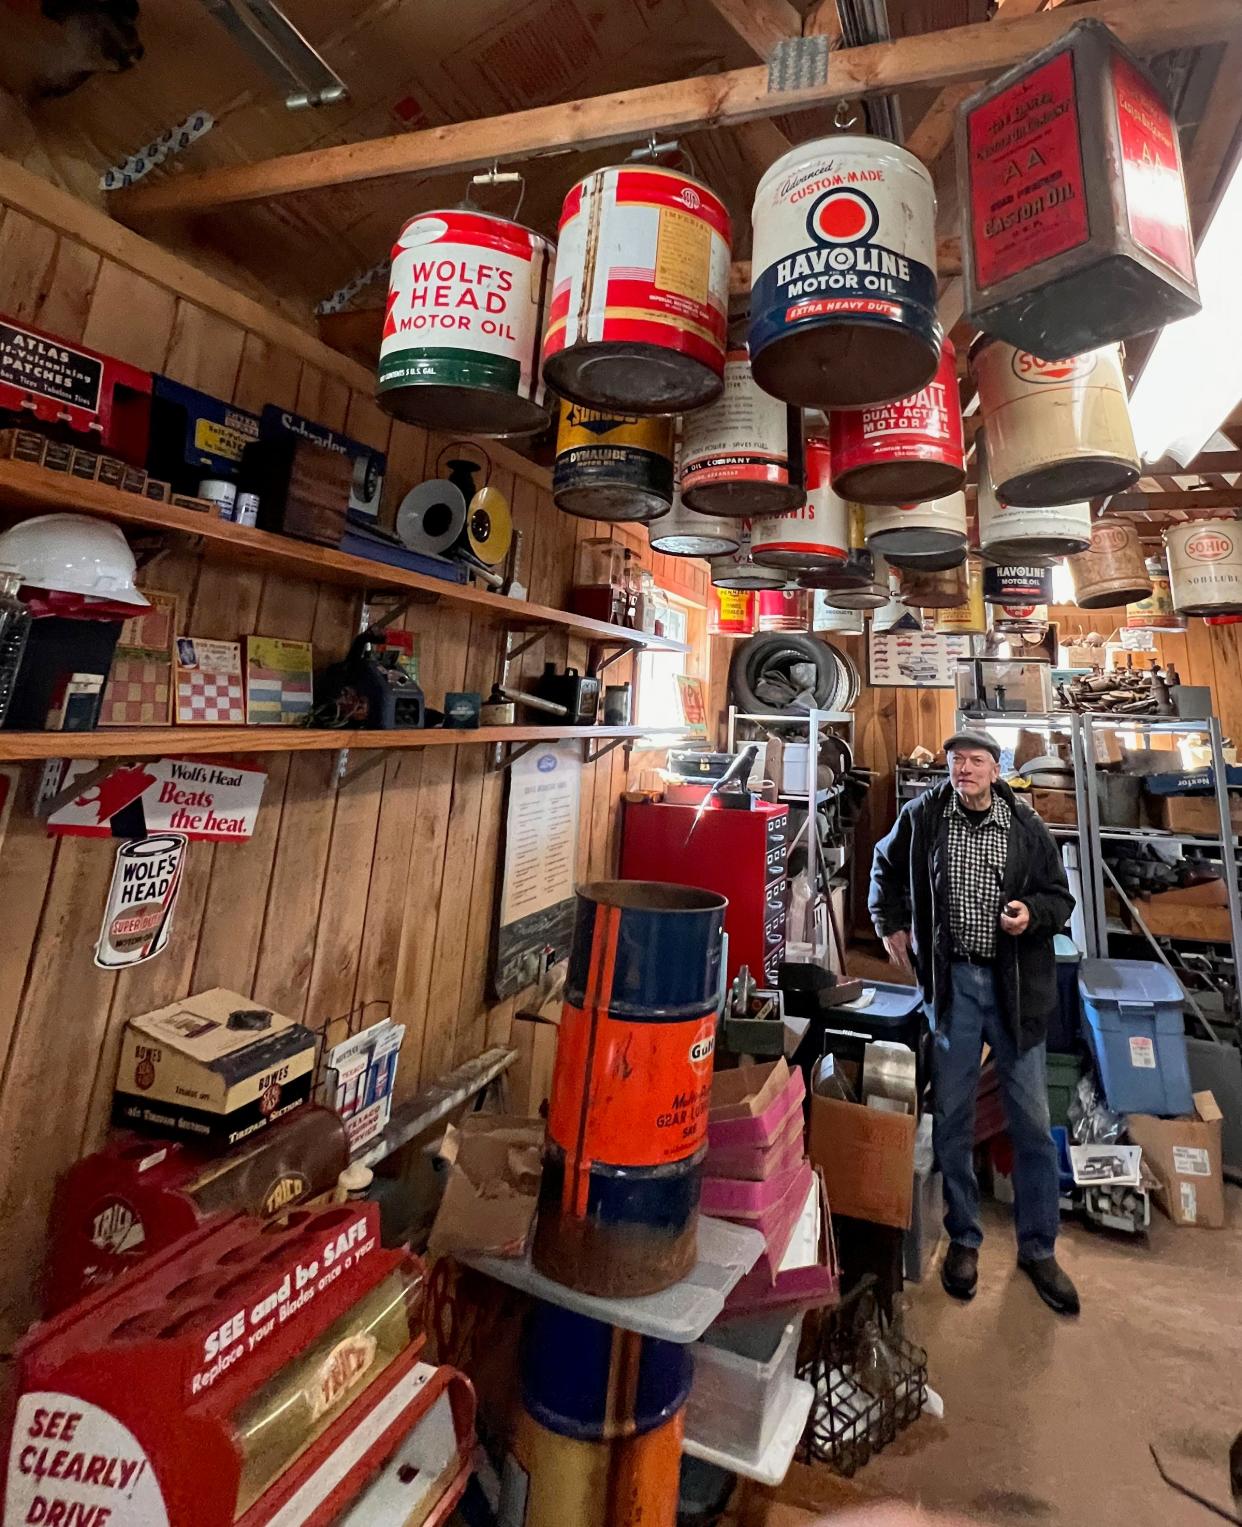 Chuck Bowman has a collection of gas cans, license plates, signs, memorobilia and classic cars and tractors.